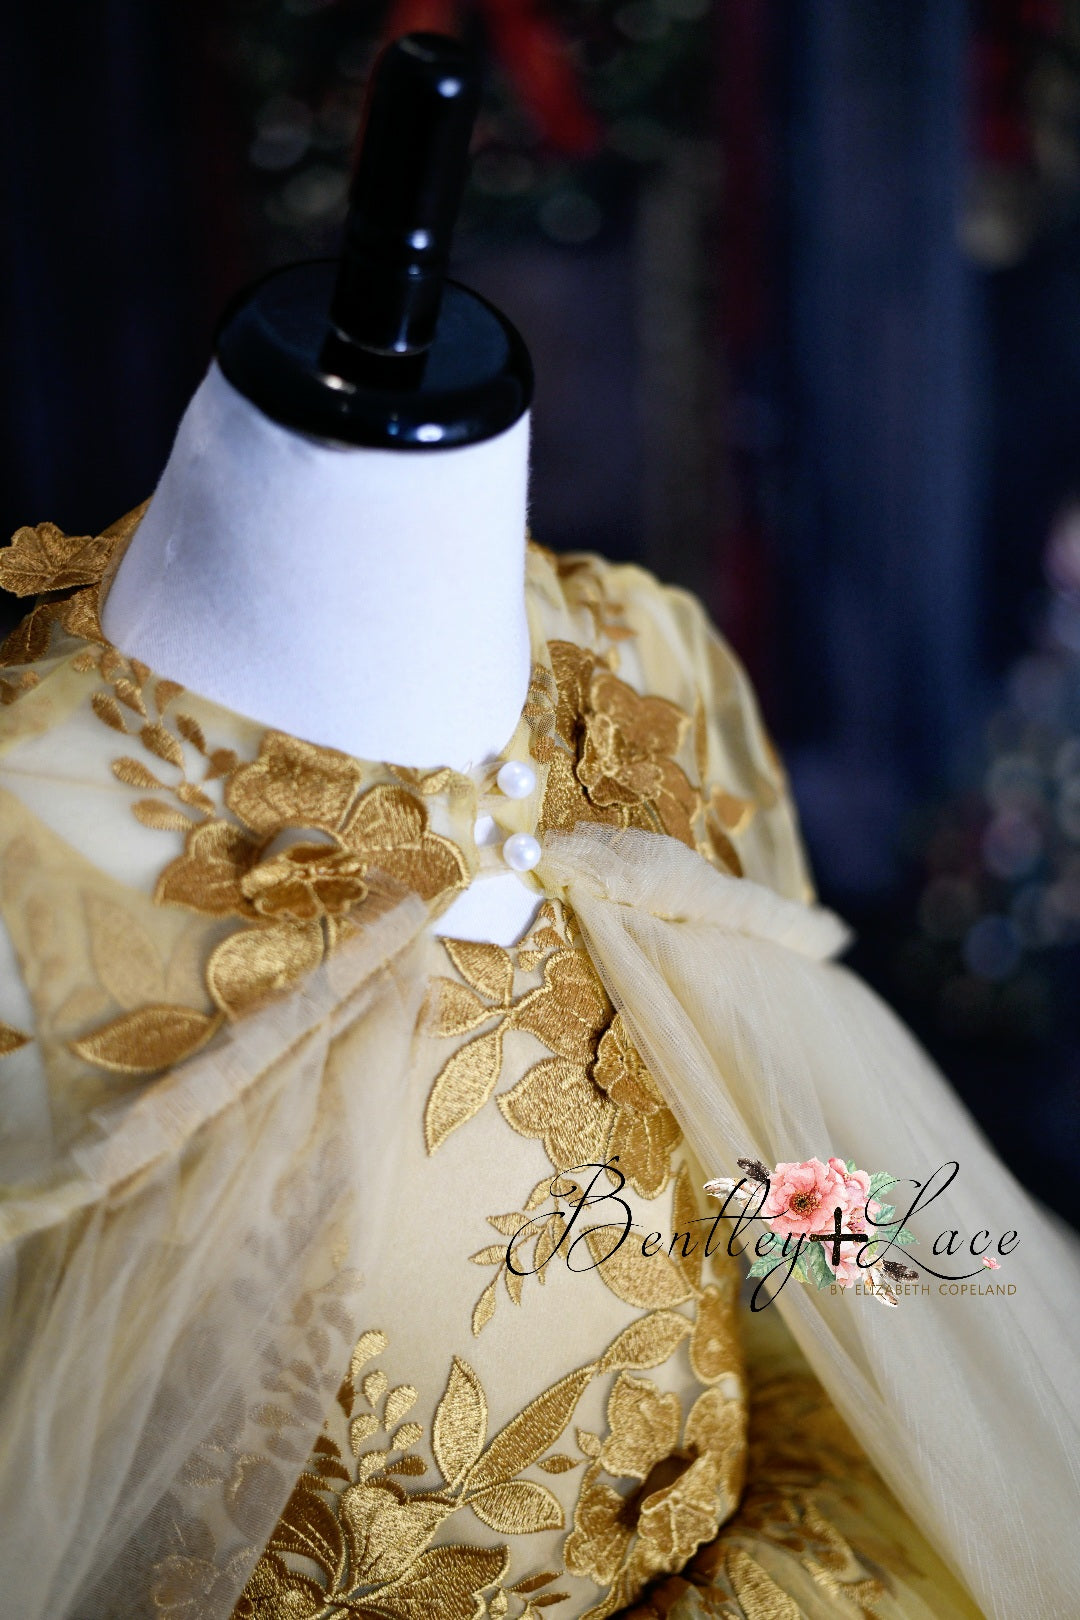 Euc retired rental "Delphine" Golden Hour -  Floor Length Gown + Cape ( 8 Year - Petite 9 Year)